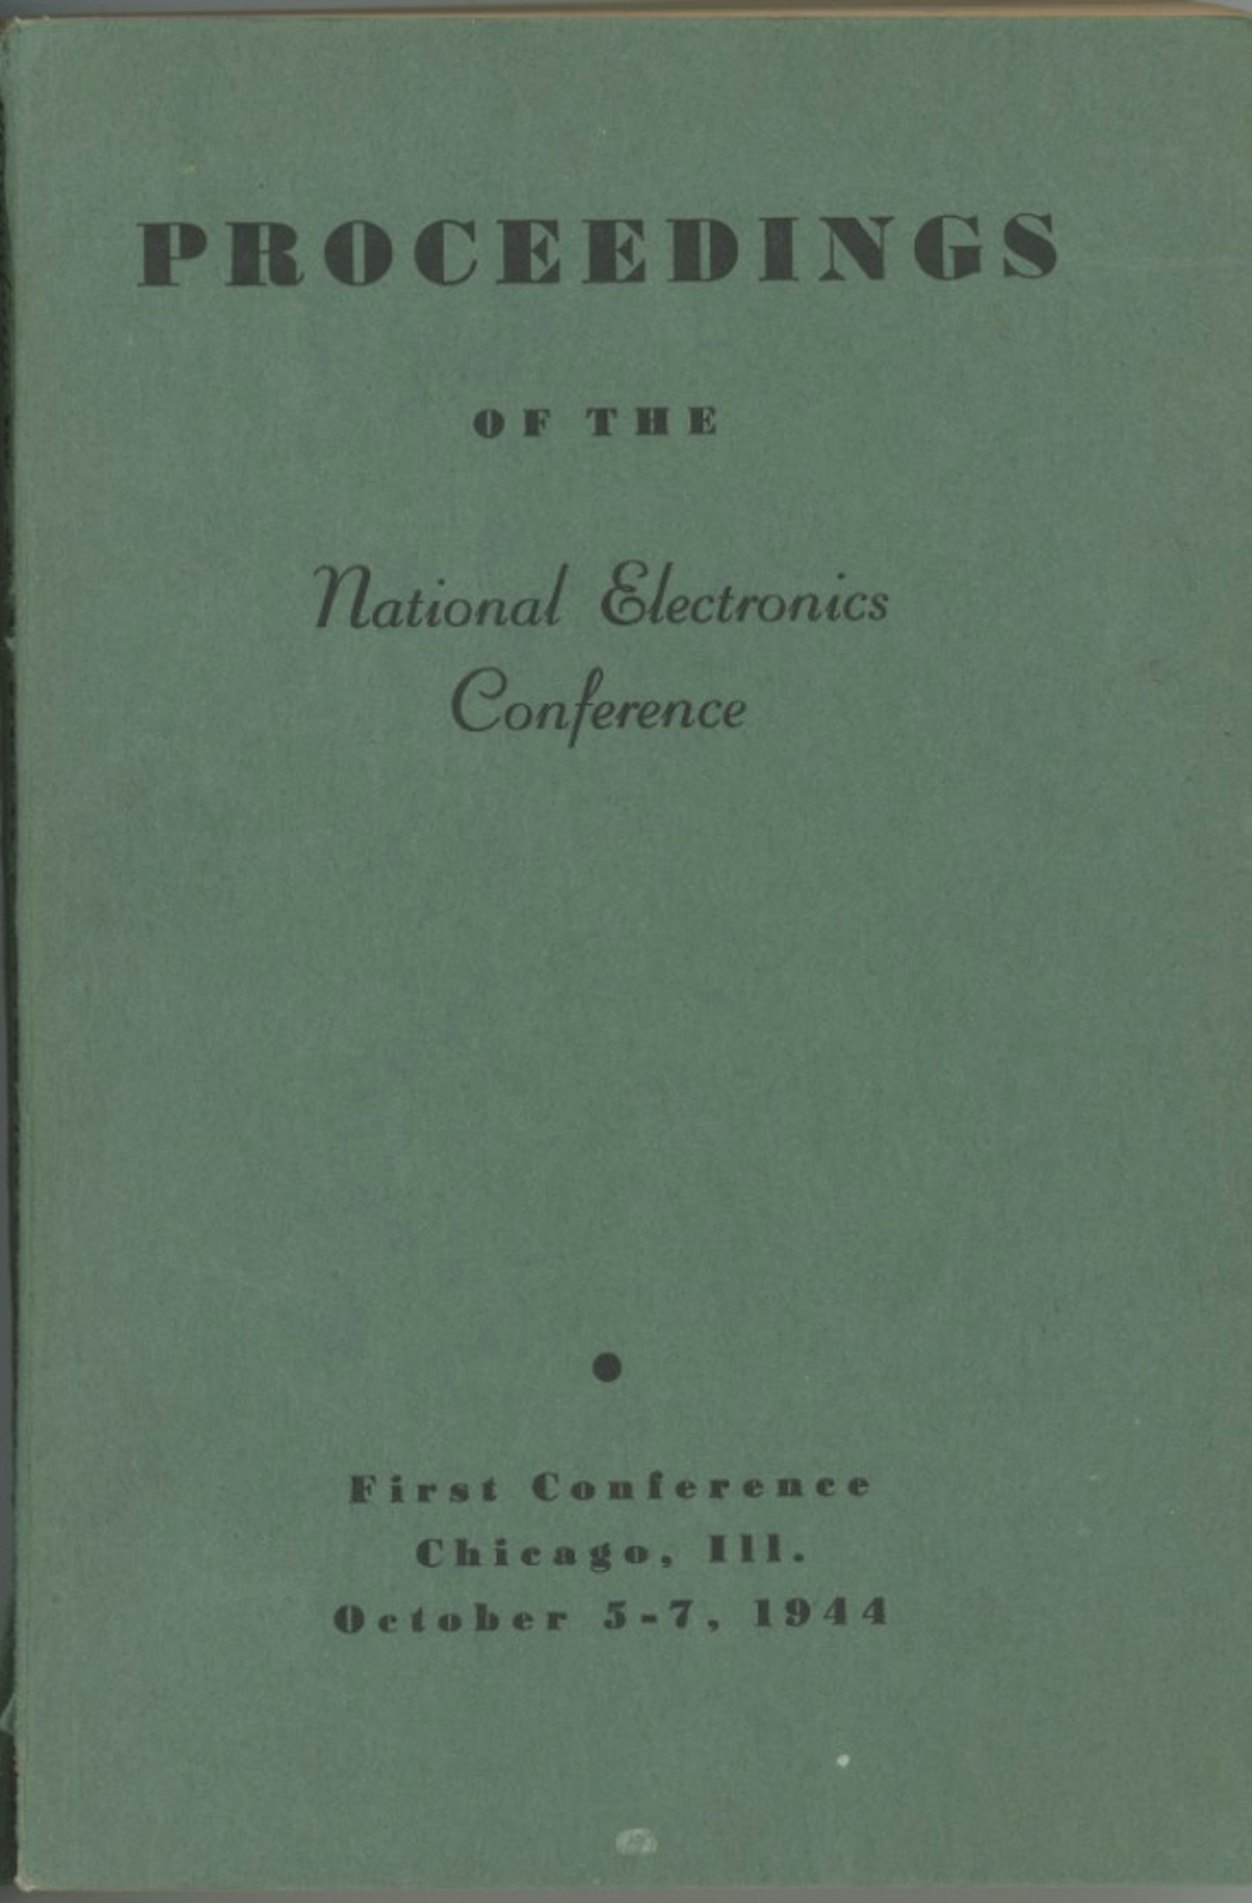 Proceedings of the National Electronics Conference